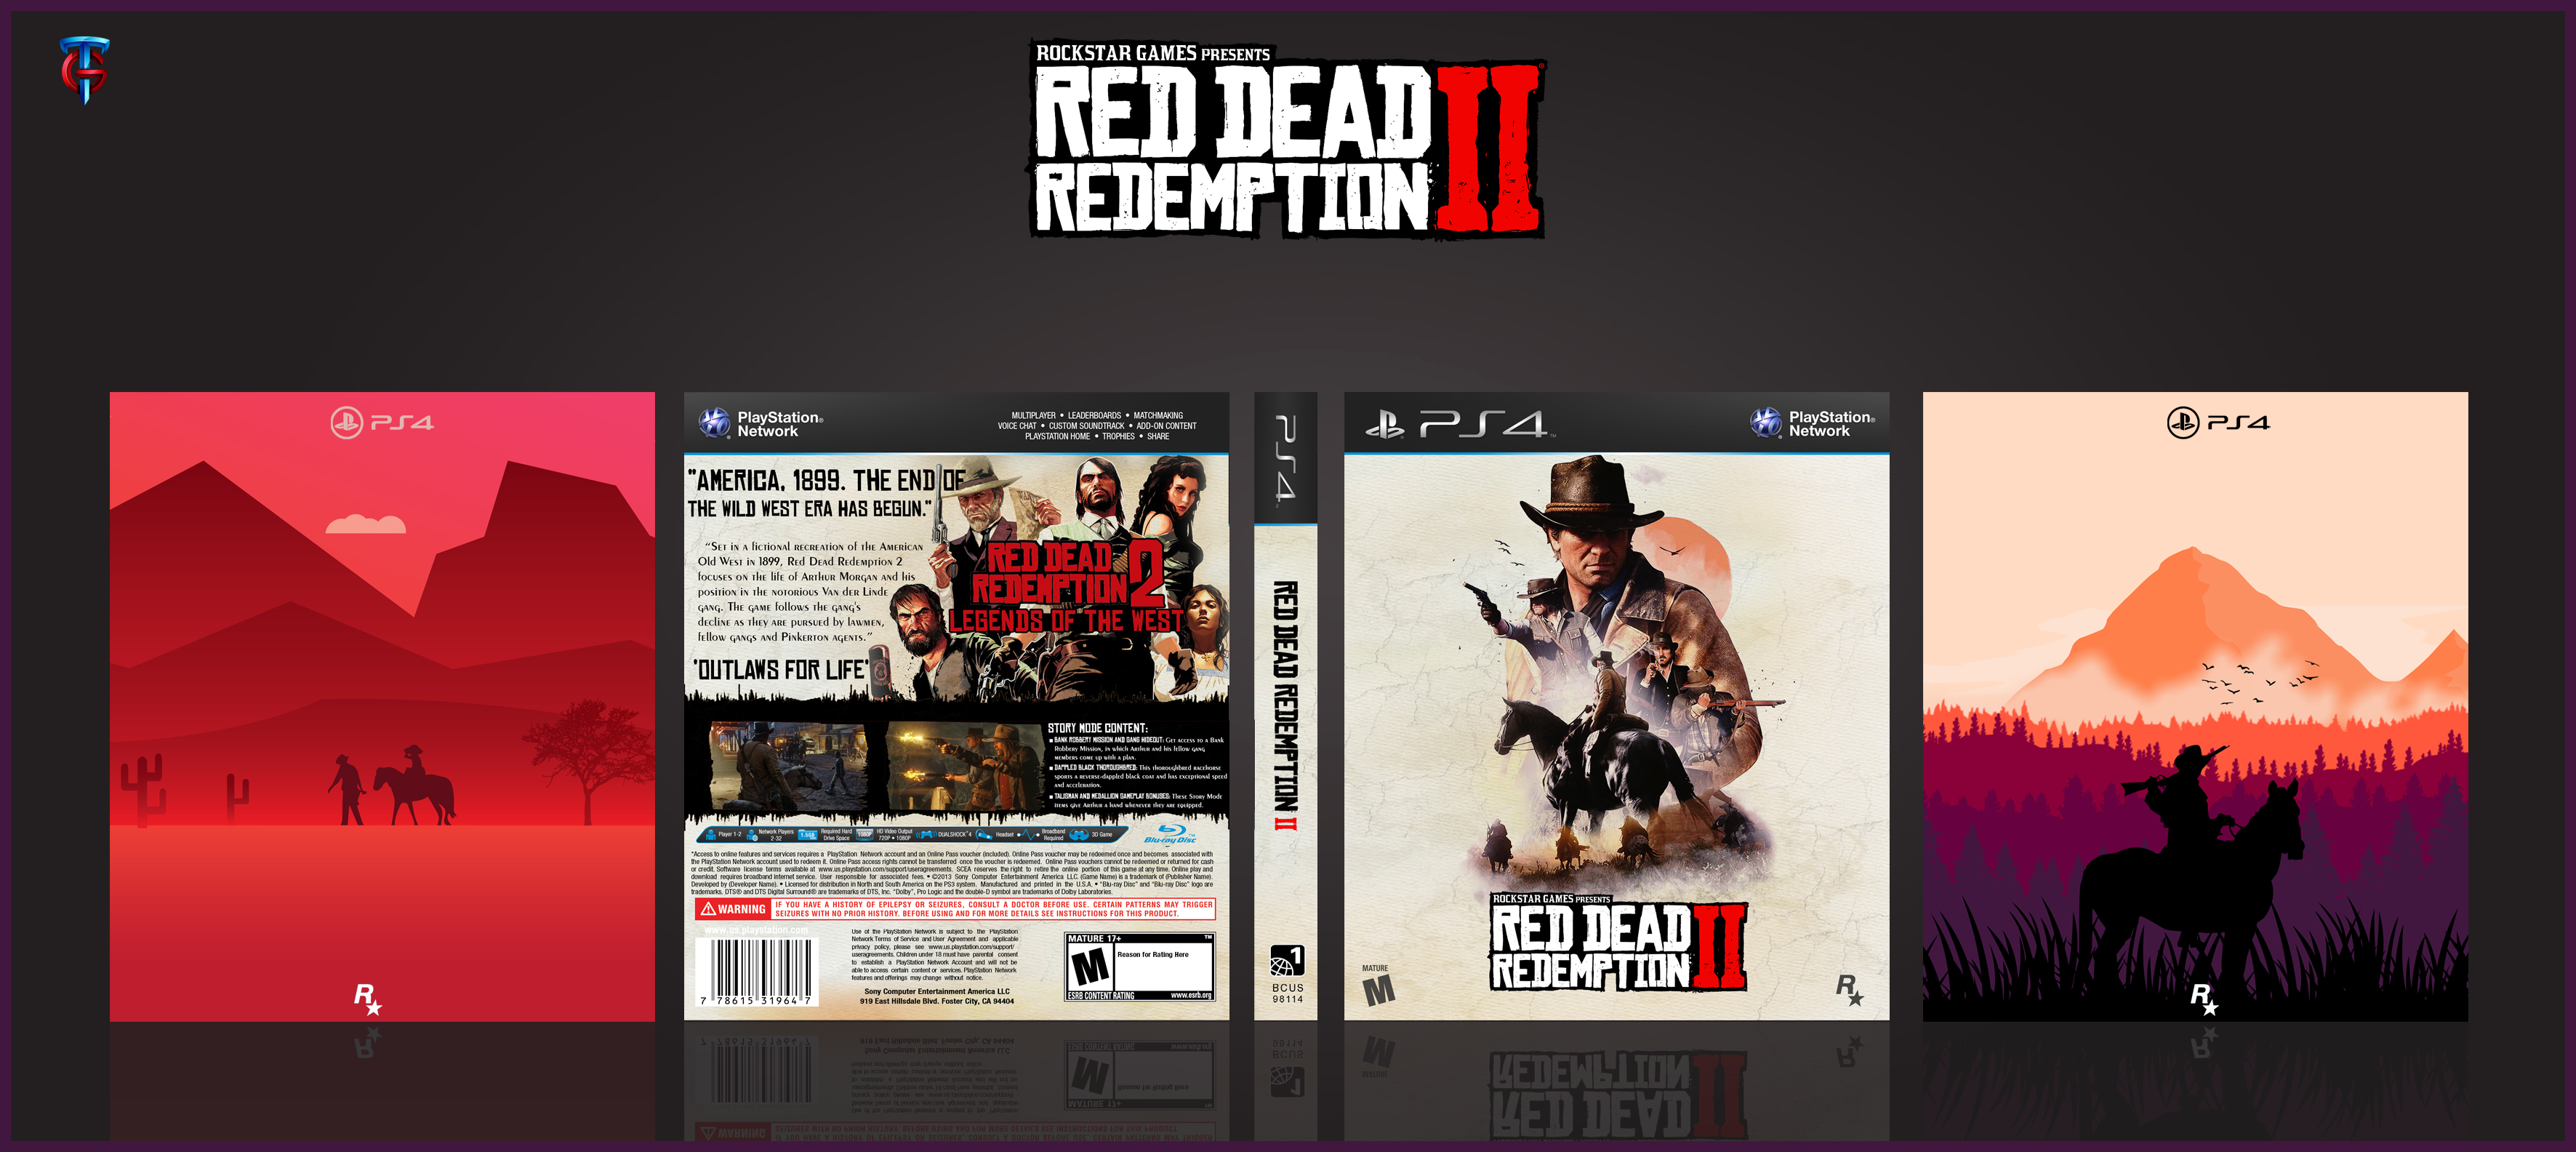 Red Dead Redemption II box cover